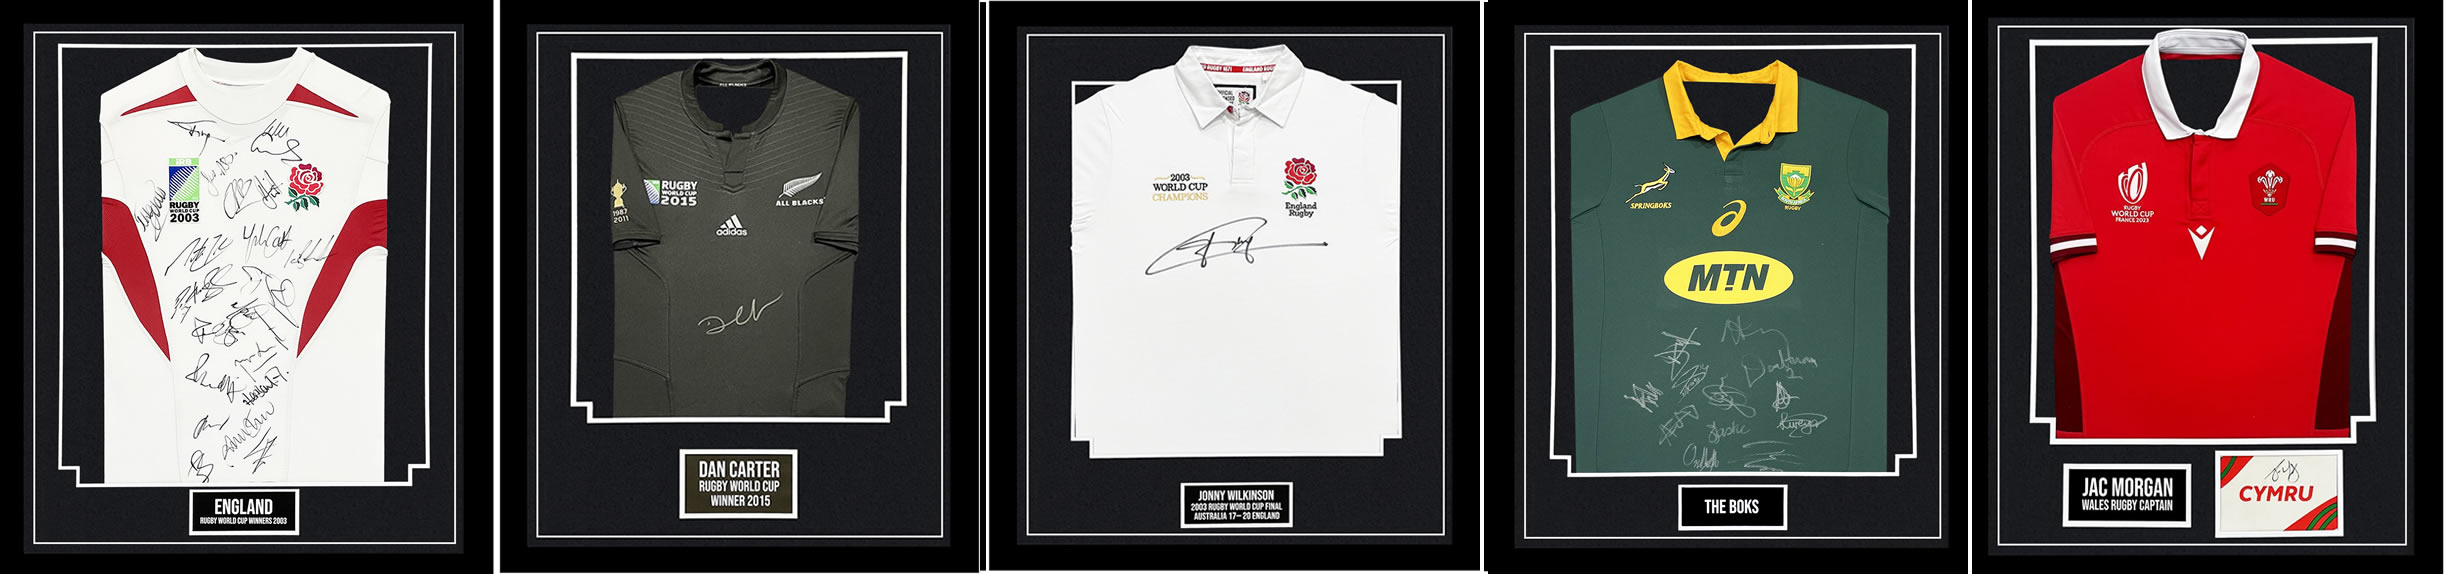 https://www.therugbypaper.co.uk/wp-content/uploads/Signed-Rugby-Shirts-at-Firma-Stella.jpg